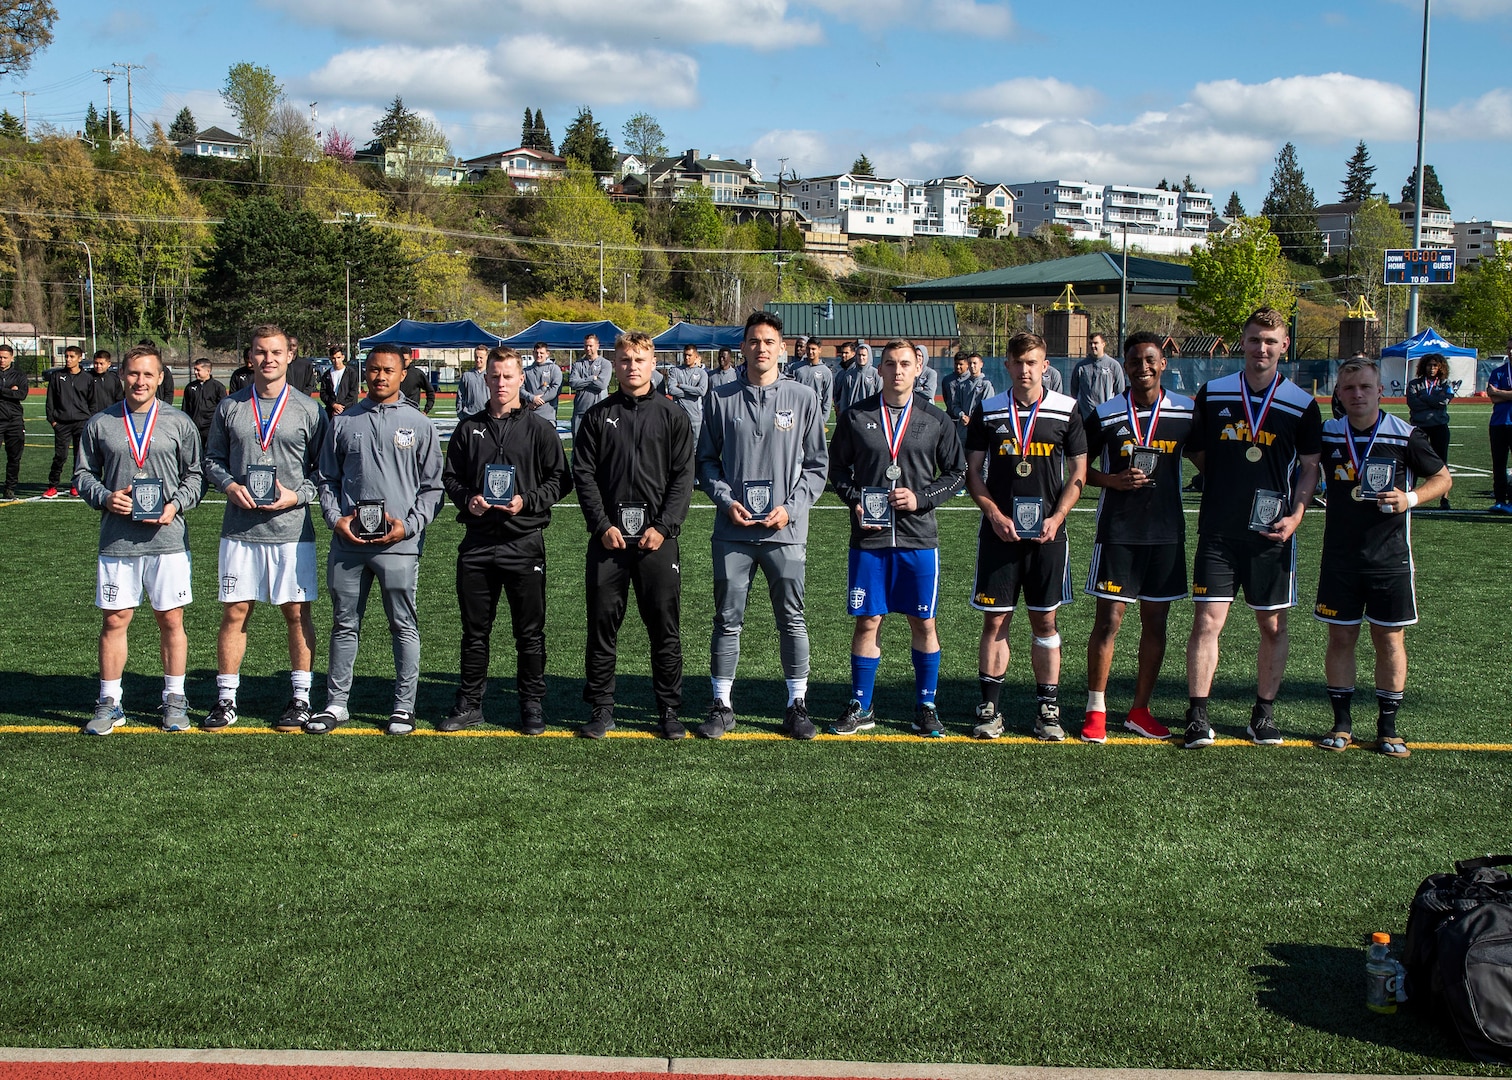 NAVAL STATION EVERETT, Wash.  (April 20, 2019) The All-Tournament Team of the 2019 Armed Forces Men's Soccer Championship held at Naval Station Everett, Wash. from 14-20 April, featuring Service members from the Army, Marine Corps, Navy (including Coast Guard) and Air Force. 
GK - SN Dylan Meeker, Naval Hospital Beaufort, SC (Navy)
Def - LTJG Alexander Maney, NS Norfolk, VA (Navy)
Def - 1LT Tanner Vosvick, Fort Hood, TX (Army)
Def - 1LT Cameron Niccum, Fort Hood, TX (Army)
Mid - Capt John Melcher, Peterson AFB CO (USAF)
Mid - 1stLt Conor Goepel, Marine Corps Base Hawaii, HI (USMC)
Mid - 1LT Alexander Clark, USAG Hawaii (Army)
Fwd - LCpl Nicholas Heath, Camp Lejeune,N.C. (USMC)
Fwd - PO2 Devonte Ecford, MCAS Yuma, AZ (Navy)
Fwd - Capt Andrew Belk, Patrick AFB FL (USAF)
Fwd - 1LT Nicholas Williams, Baumholder, Germany (Army)
(U.S. Navy photo by MC2 Ian Carver/Released)